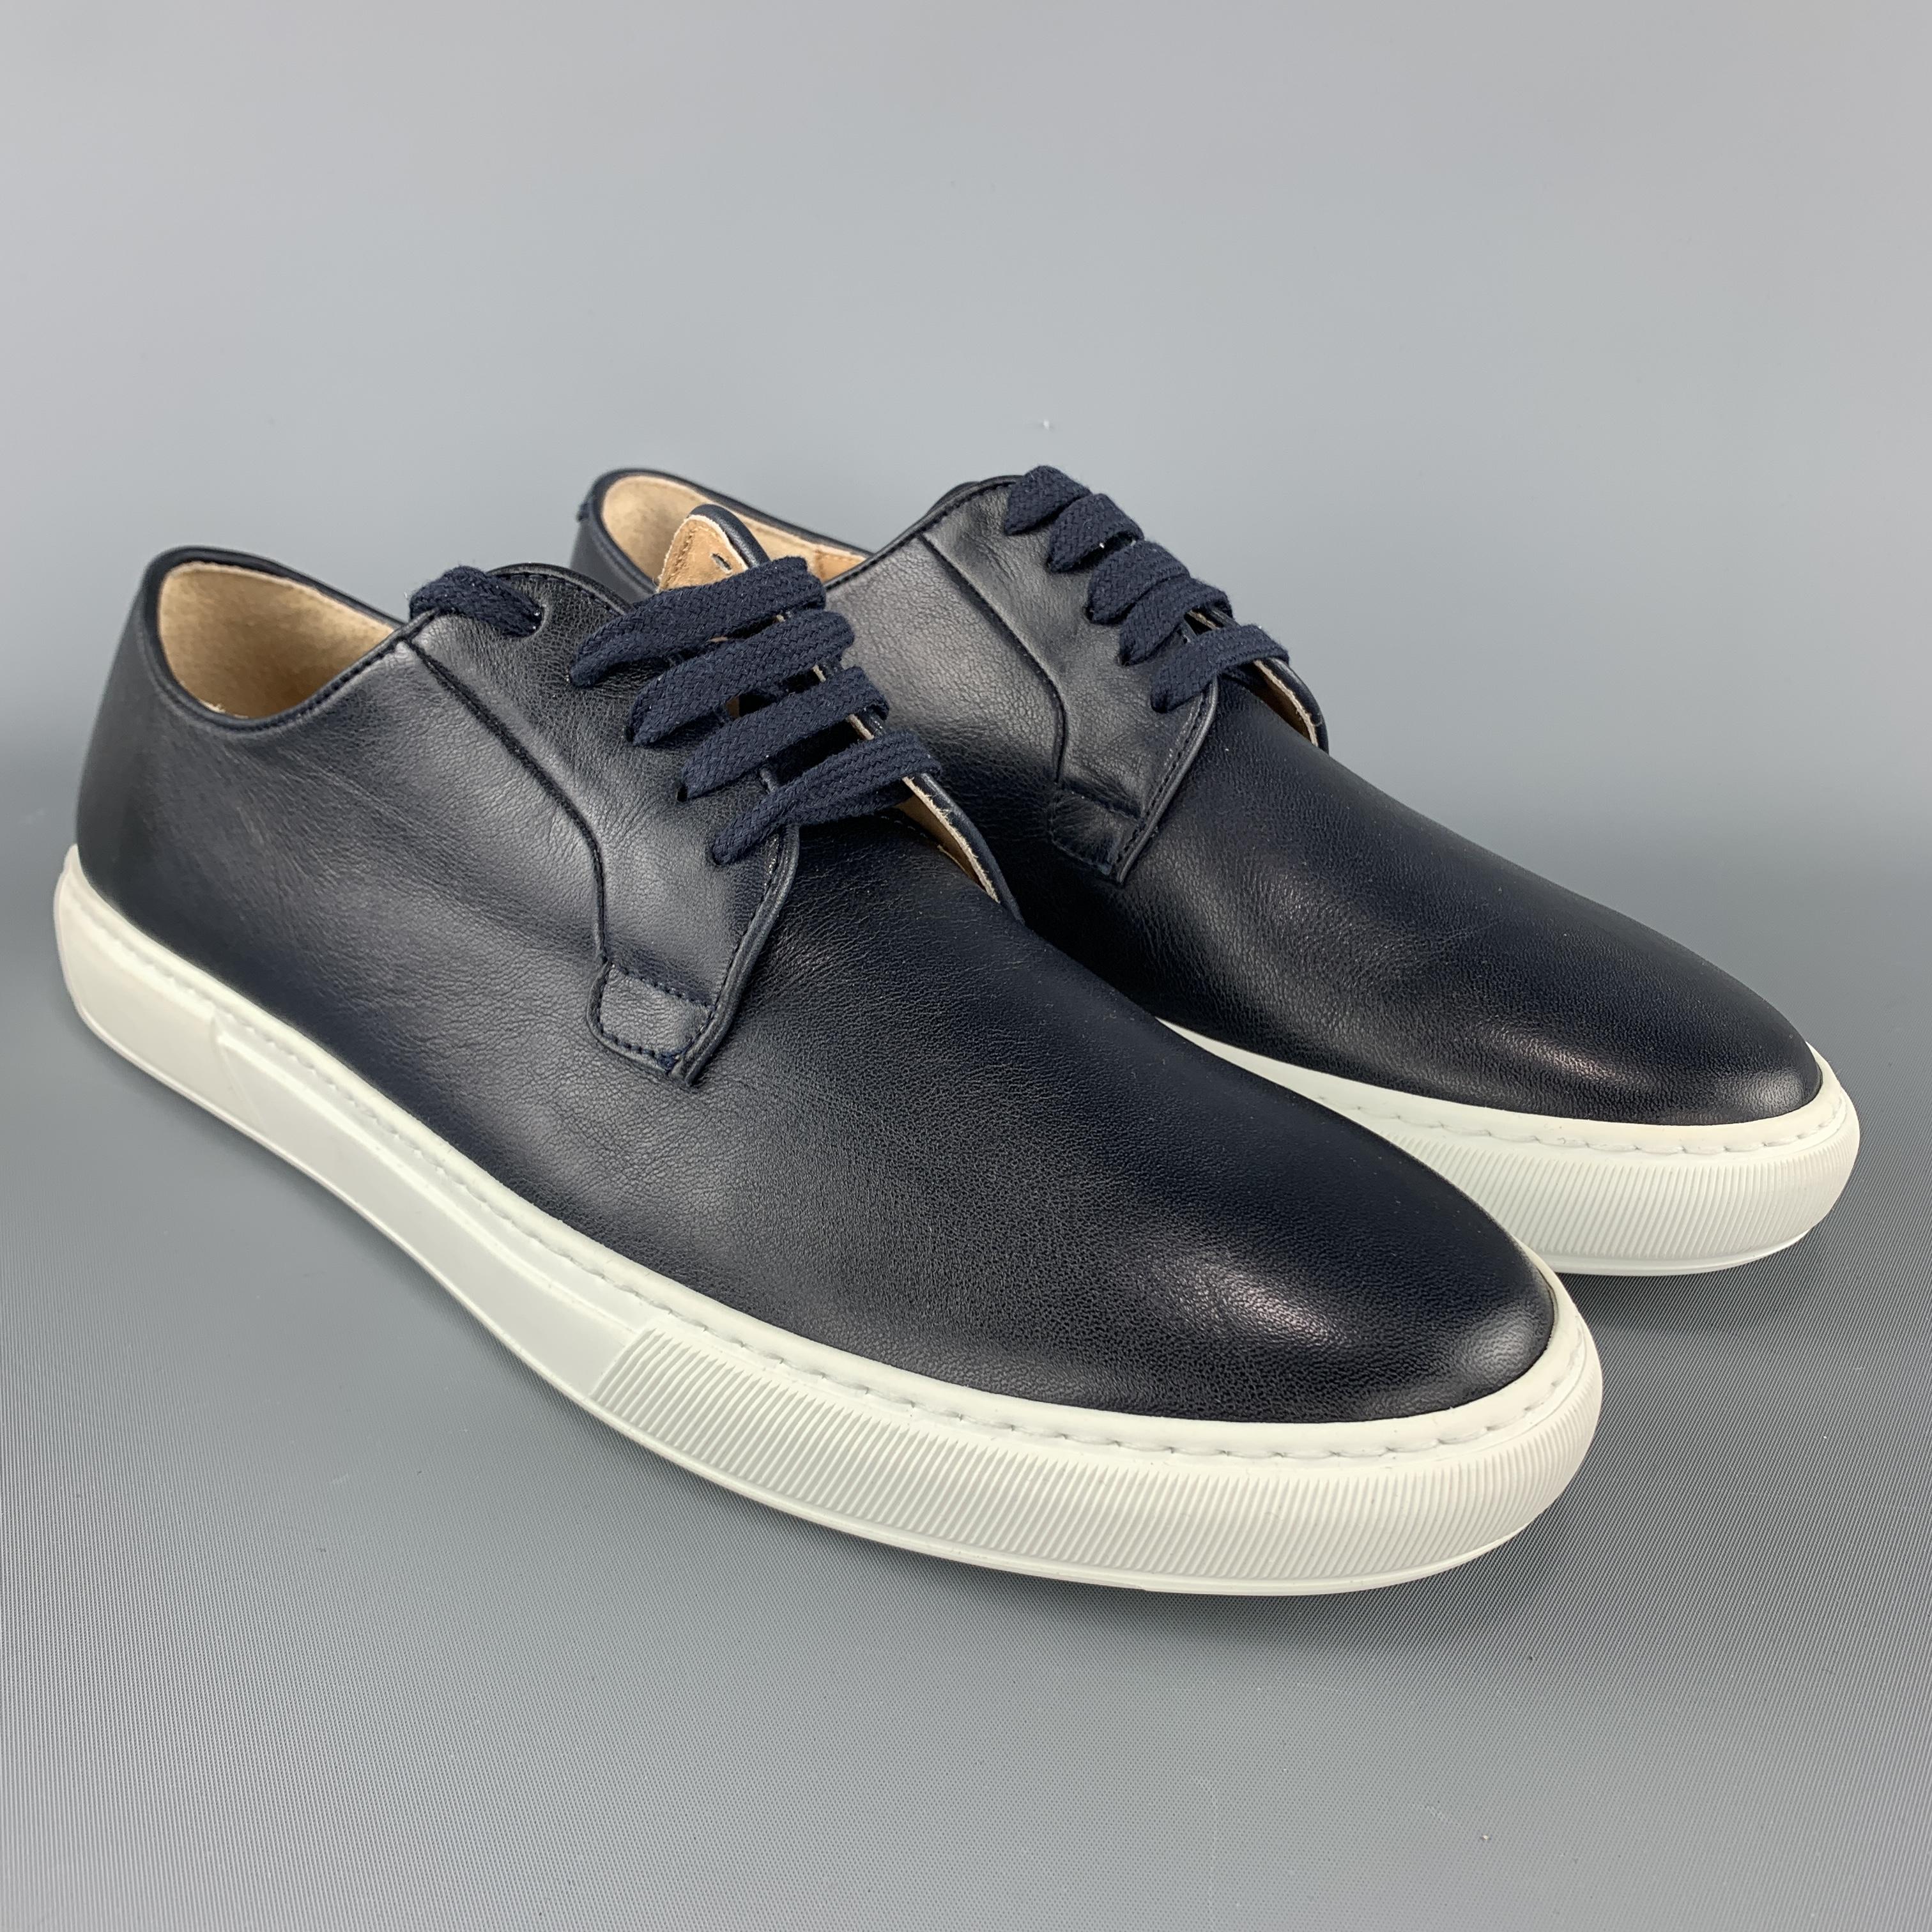 BARNEY'S NEW YORK low top sneakers come in navy blue leather with a white rubber sole. Made in Italy.

New with Box.
Marked: US 13

Outsole: 12.5 x 4.25 in.